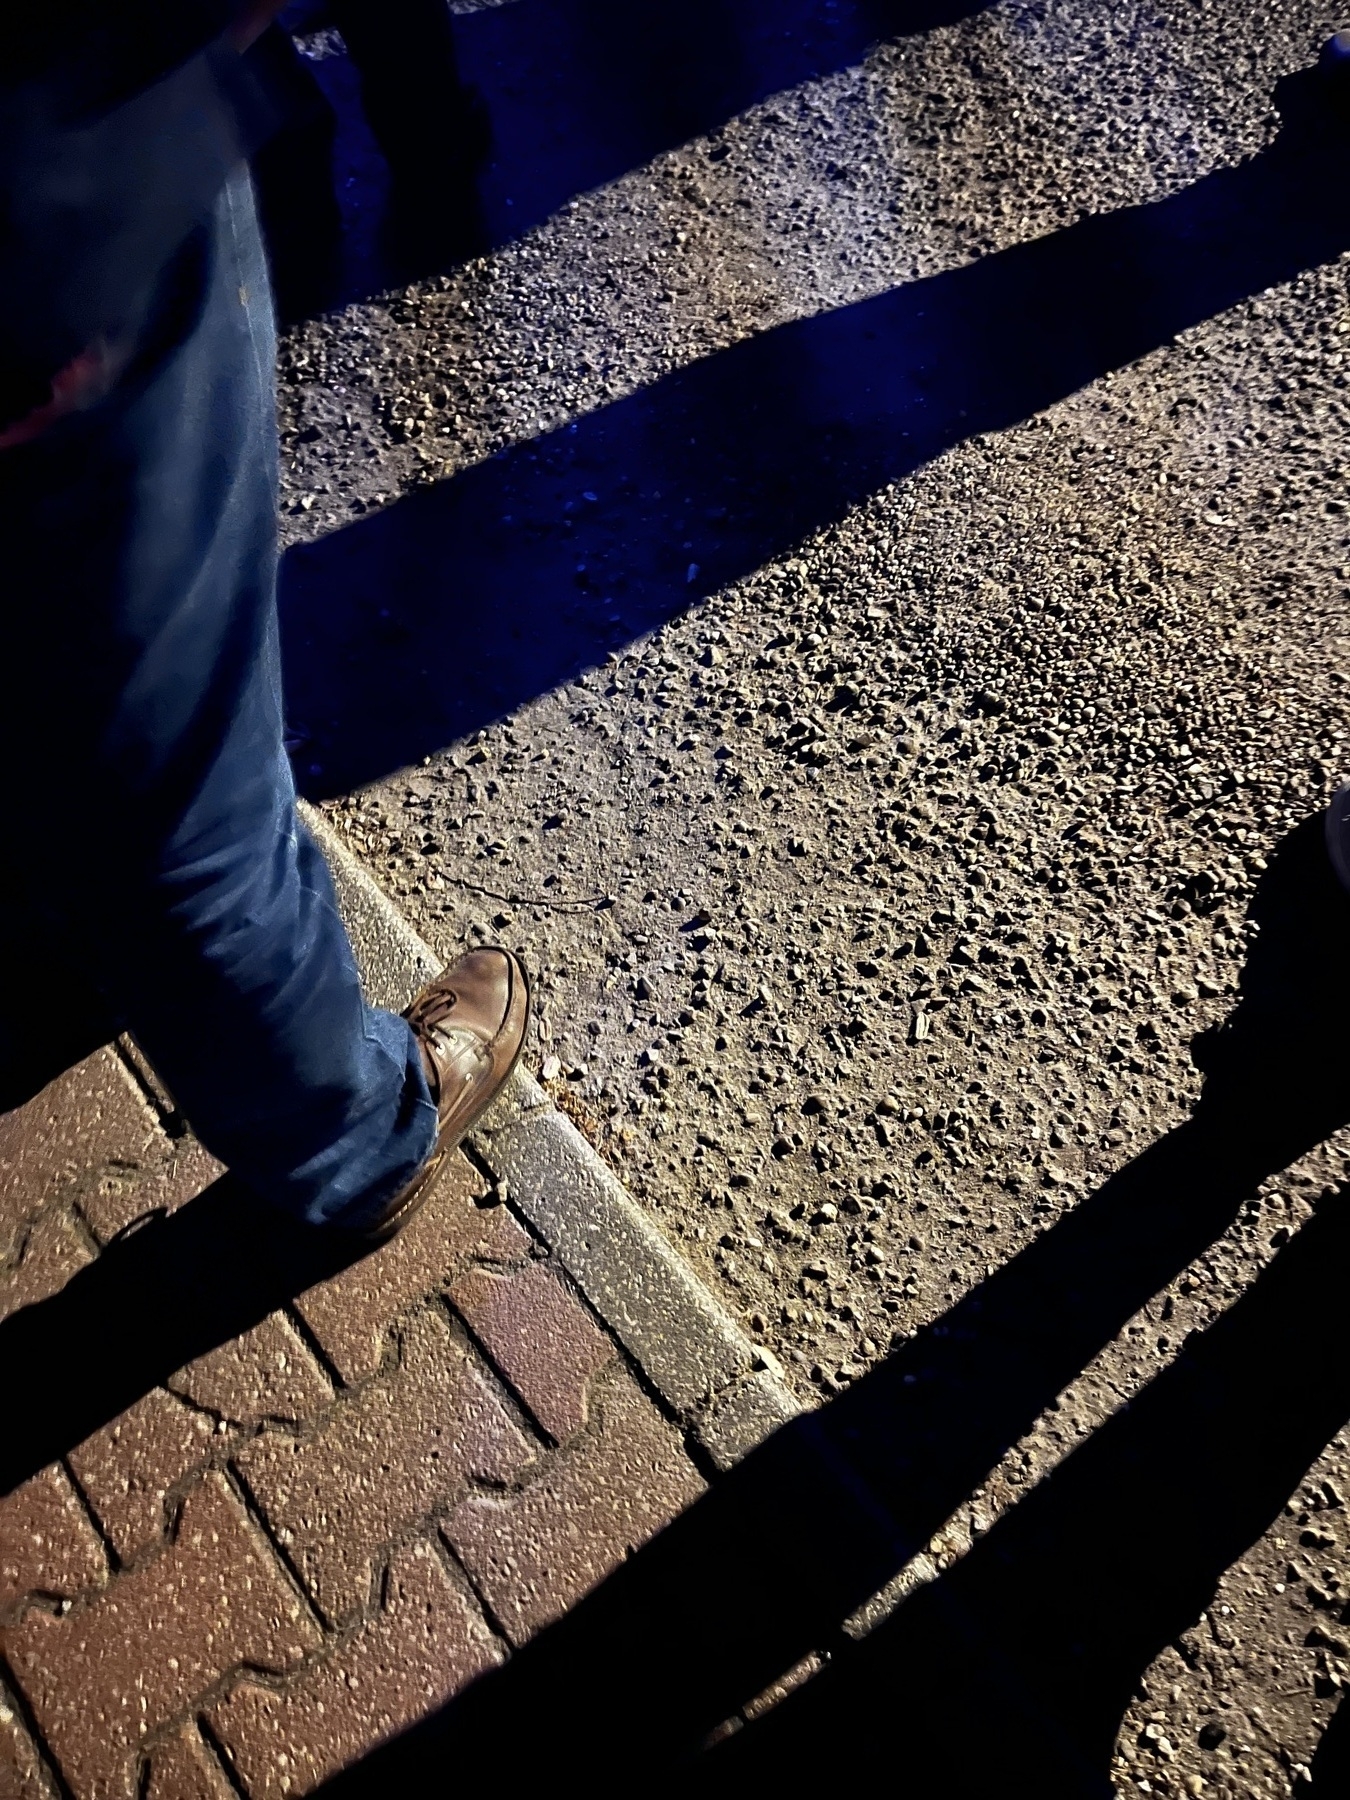 The leg and feet of someone standing outside at night and shadows cast by other people as the people listen to music at night.